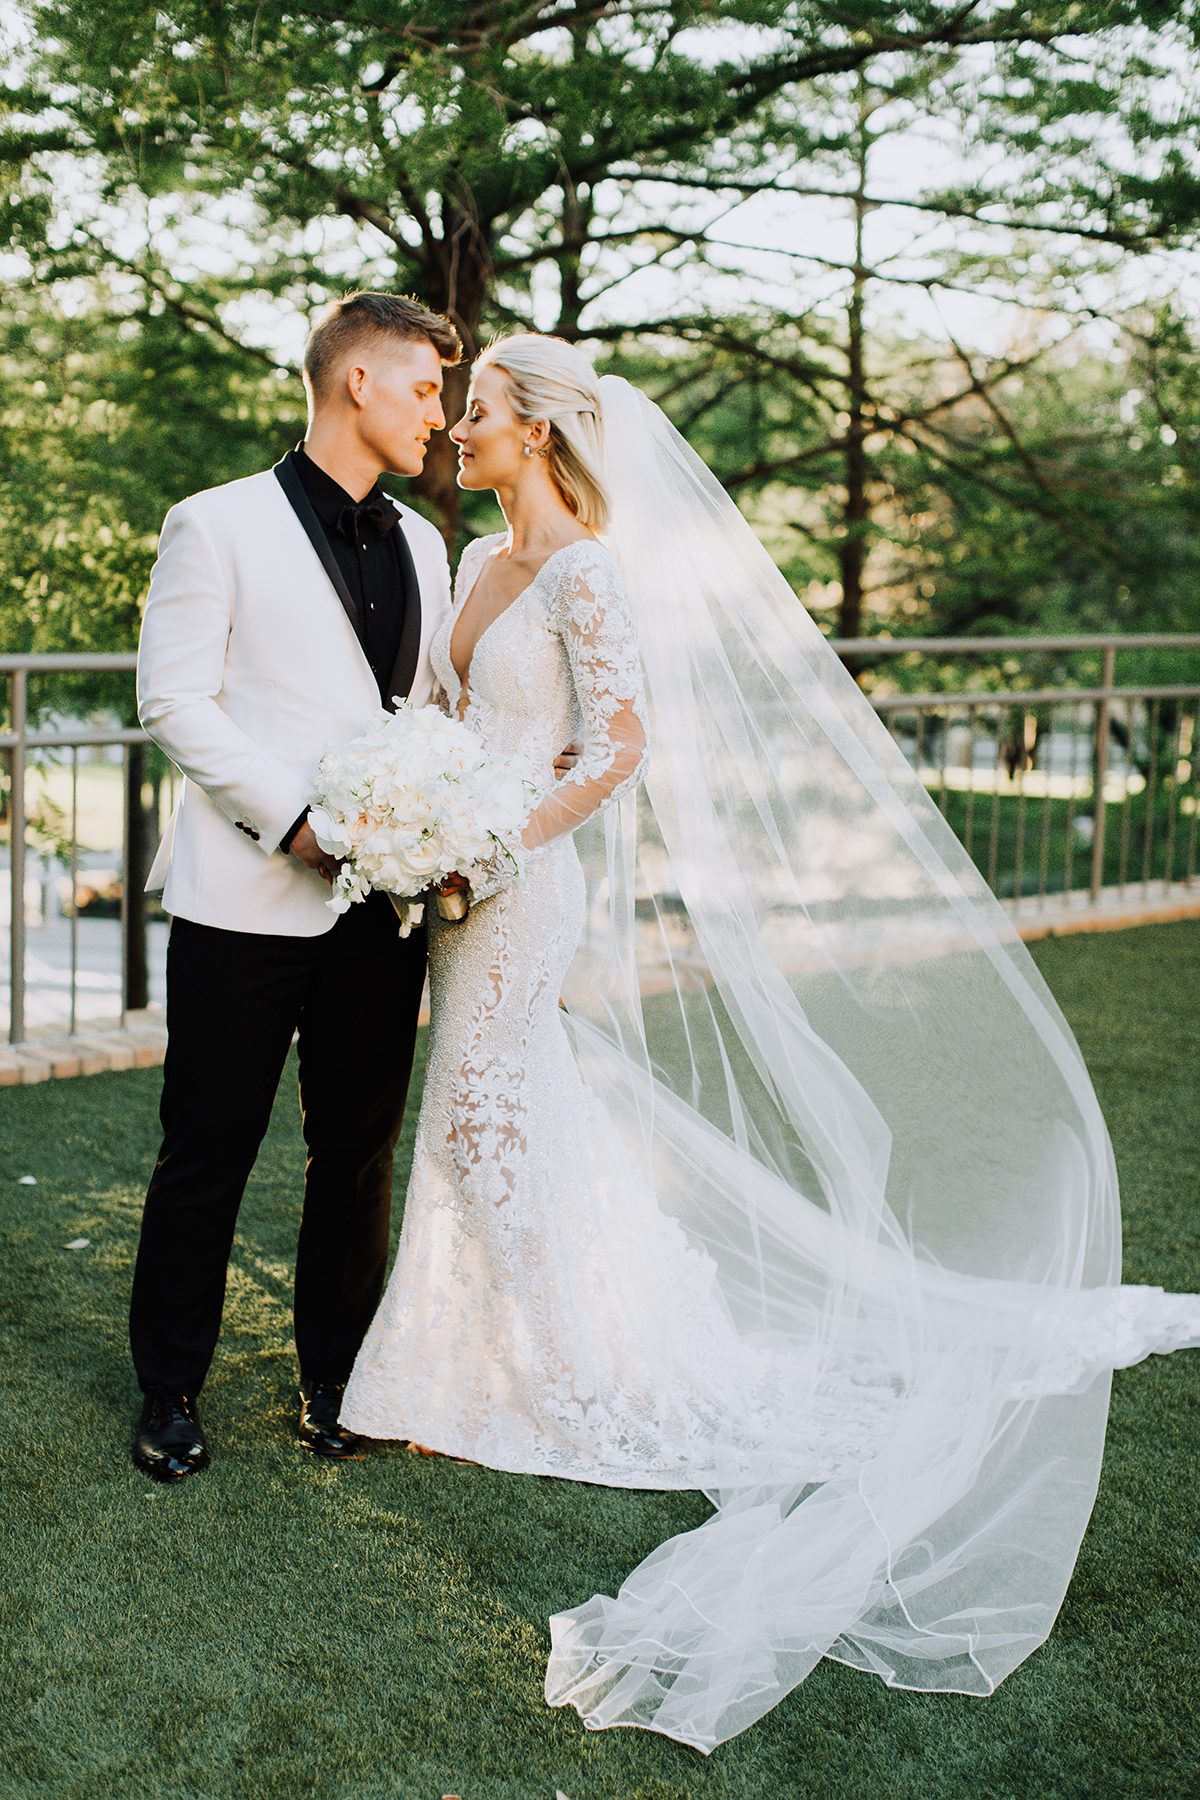 long sleeve wedding dress with low back and long veil from bridal boutique